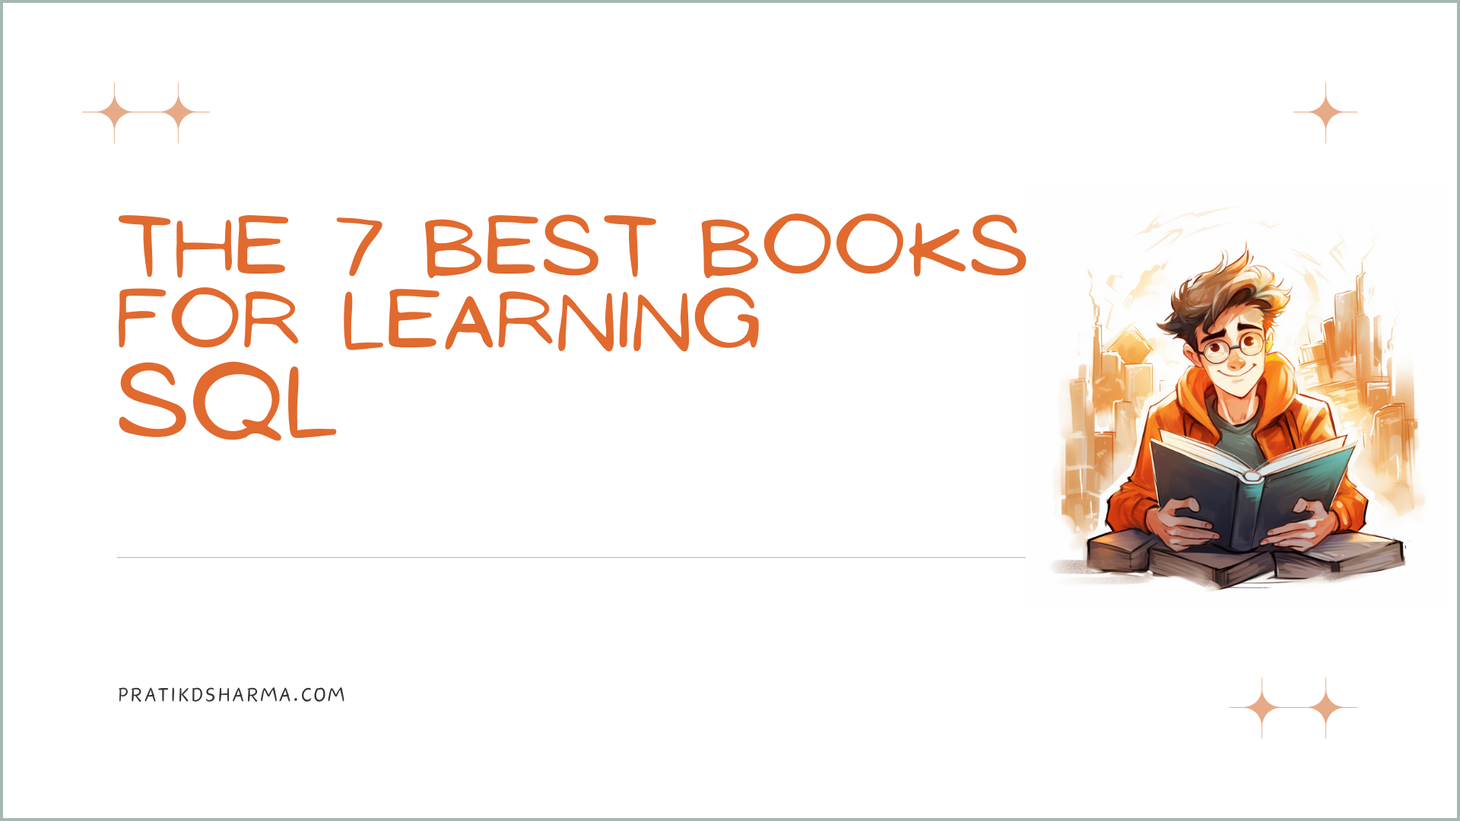 The 7 Best Books for Learning SQL.